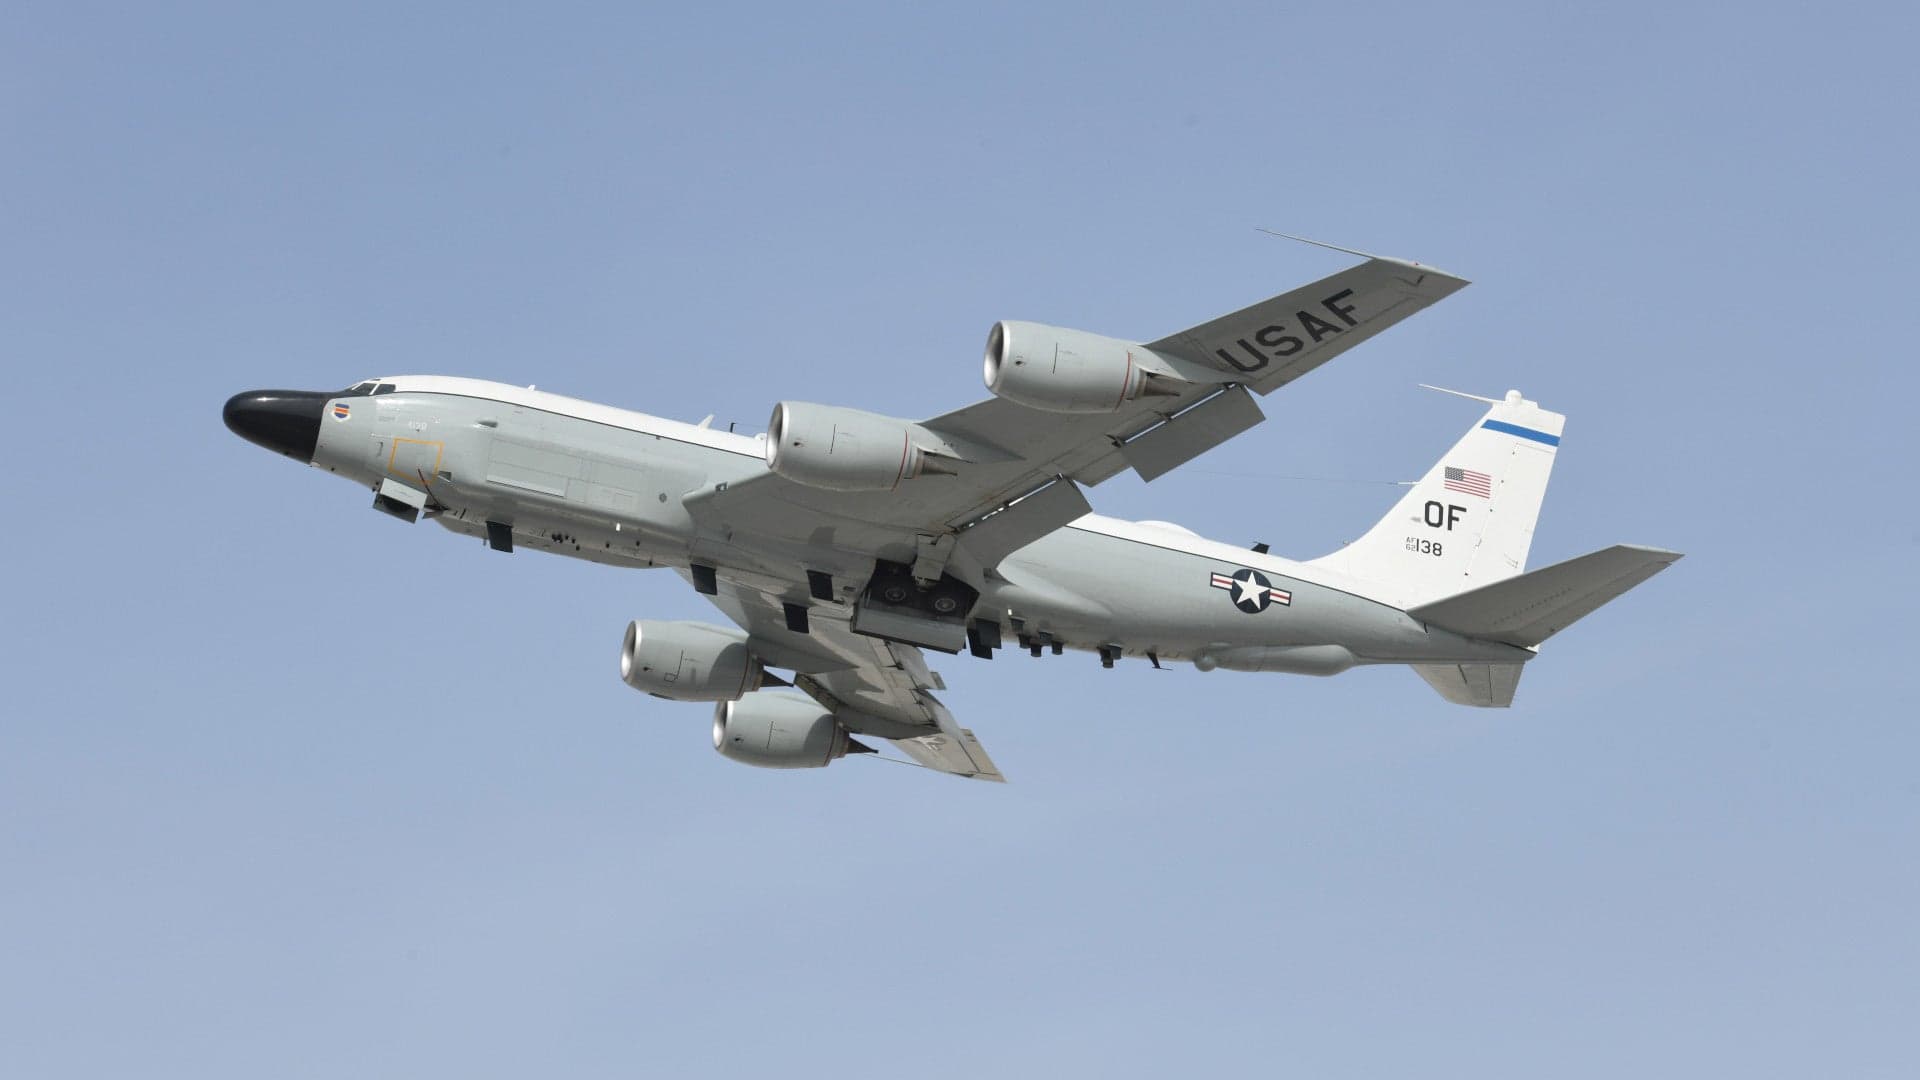 RC-135W Rivet Joint Spy Plane Is Flying Orbits Over Kabul (Updated)